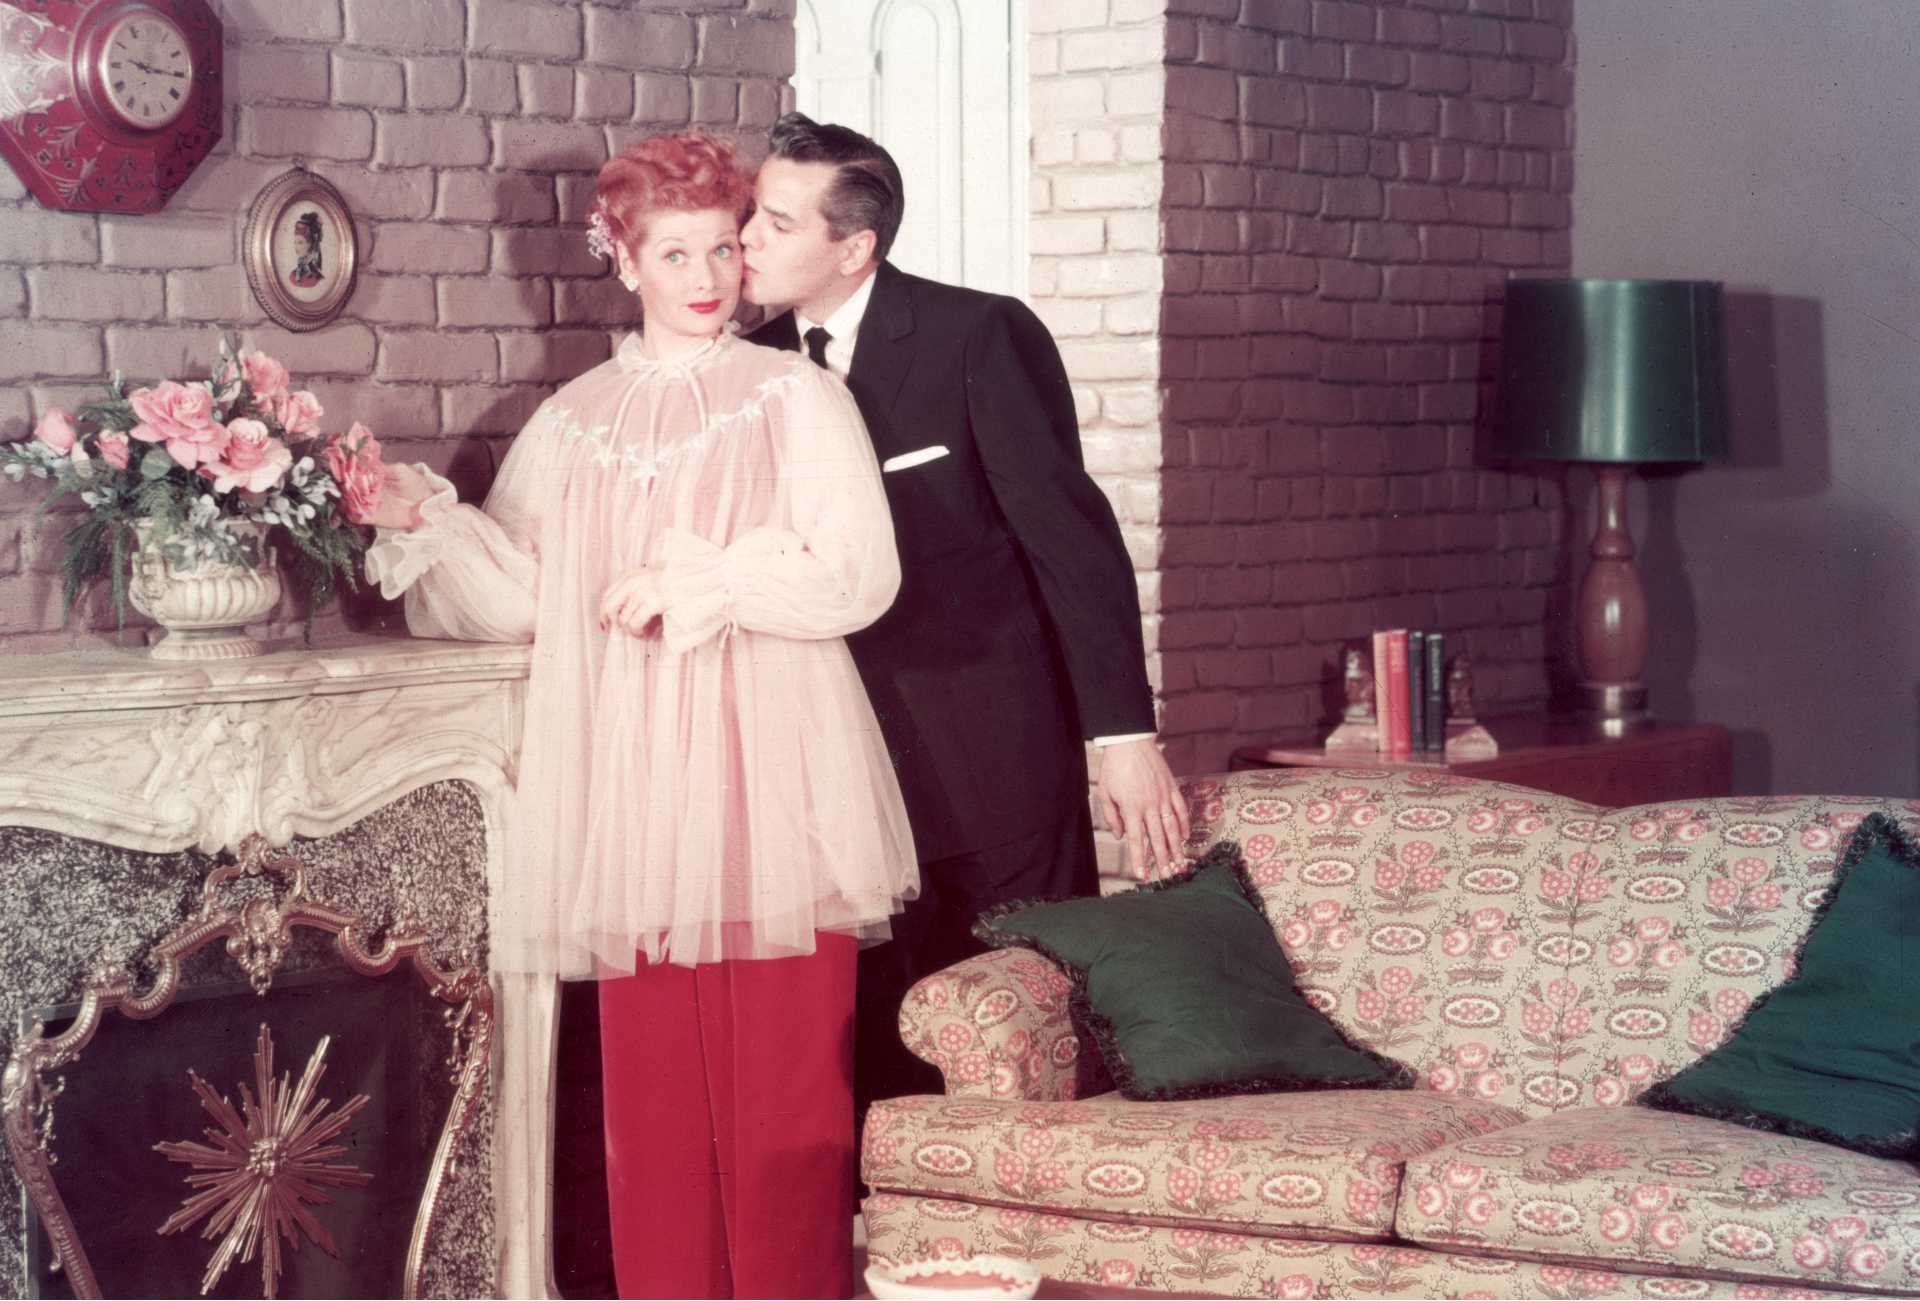 ‘I Love Lucy’: Lucille Ball’s Pregnancy Was Almost Too Controversial for TV